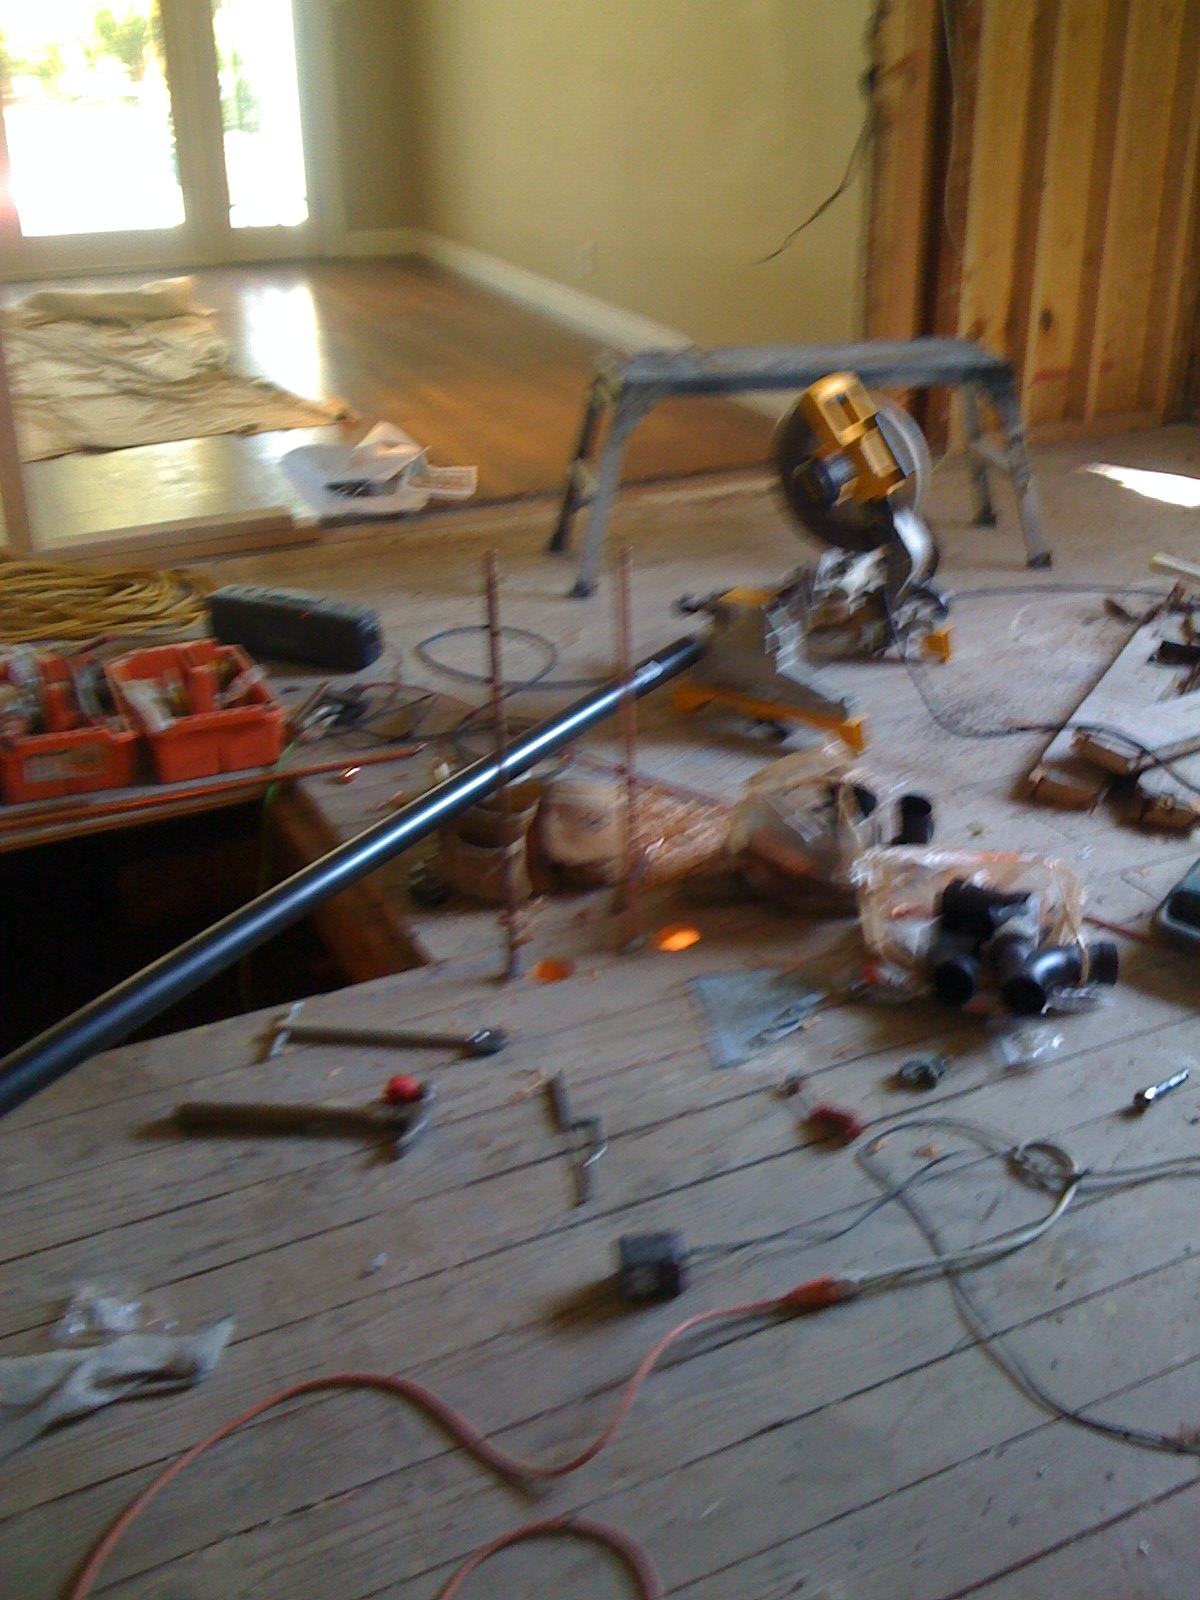 replacing all of the sewer lines on the existing home, plus all new plumbing kitchen area